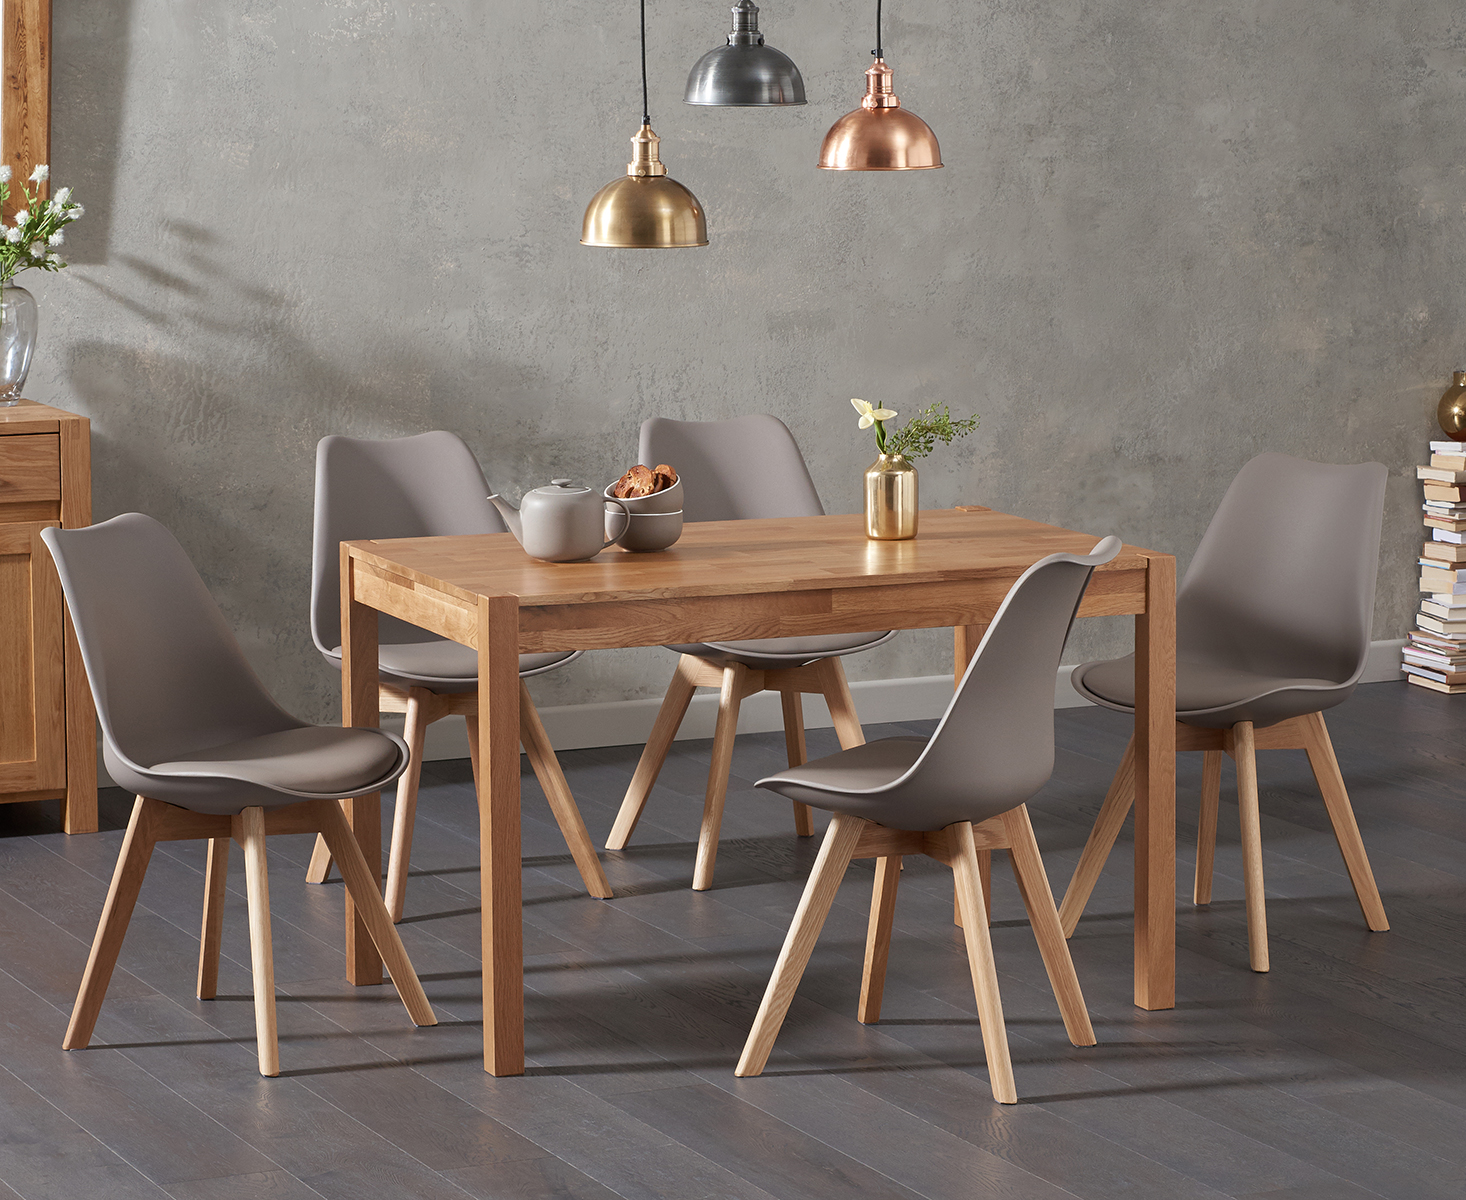 Oxford 120cm Solid Oak Dining Table With 6 Dark Grey Orson Faux Leather Chairs